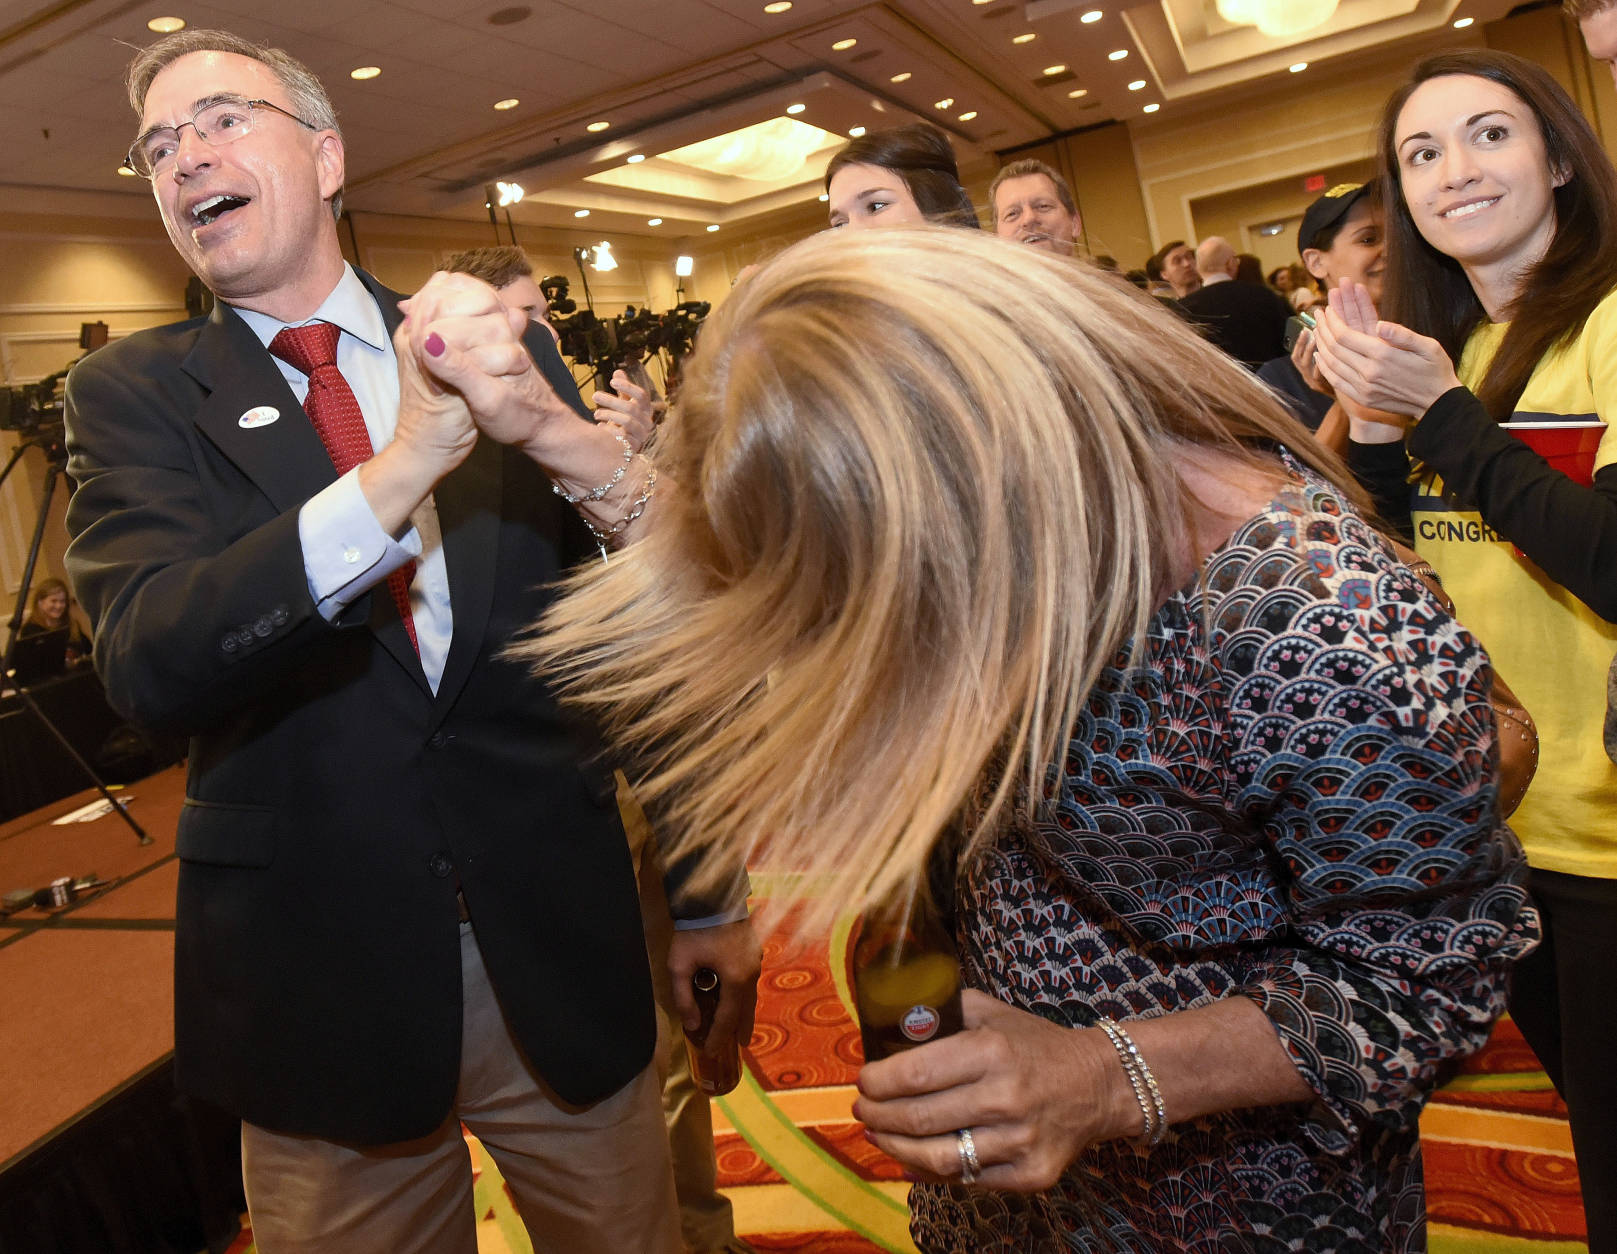 U.S. Rep. Andy Harris, left, a Maryland Republican running for re-election, high-fives supporter Debbie Peroutka, center, of Severna Park, Md., as his daughter, Rebecca Harris, right, 29, applauds during an election night party held by the Maryland Republican Party, Tuesday, Nov. 8, 2016 in Linthicum, Md. (AP Photo/Steve Ruark)